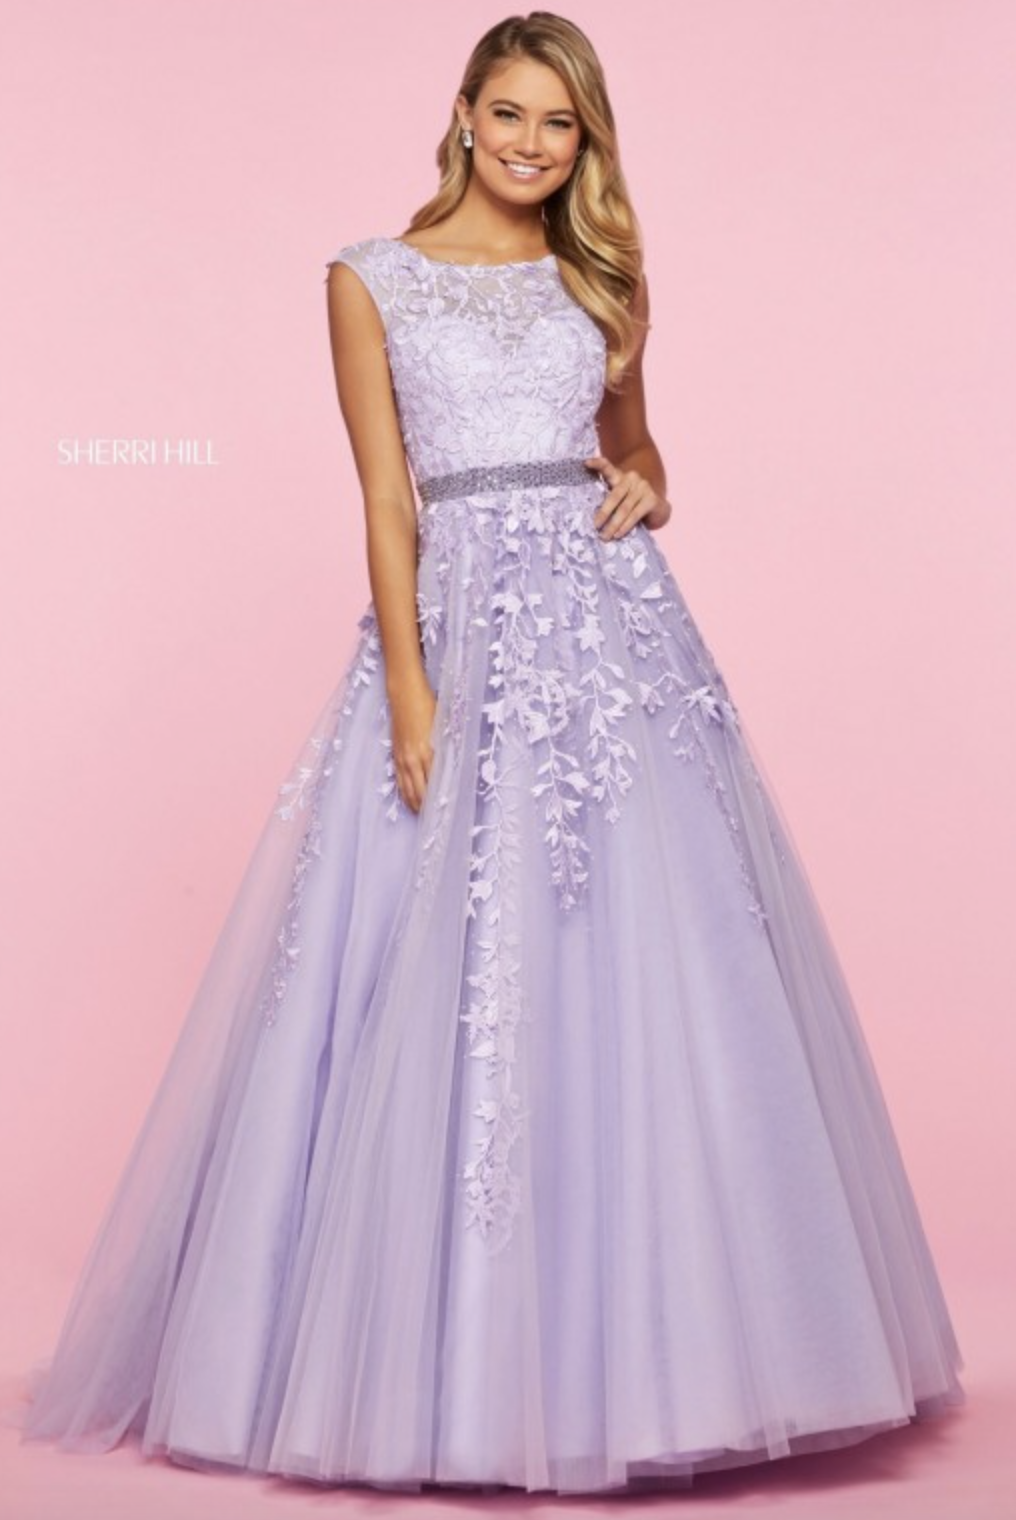 Top Modest Prom Dresses of 2021